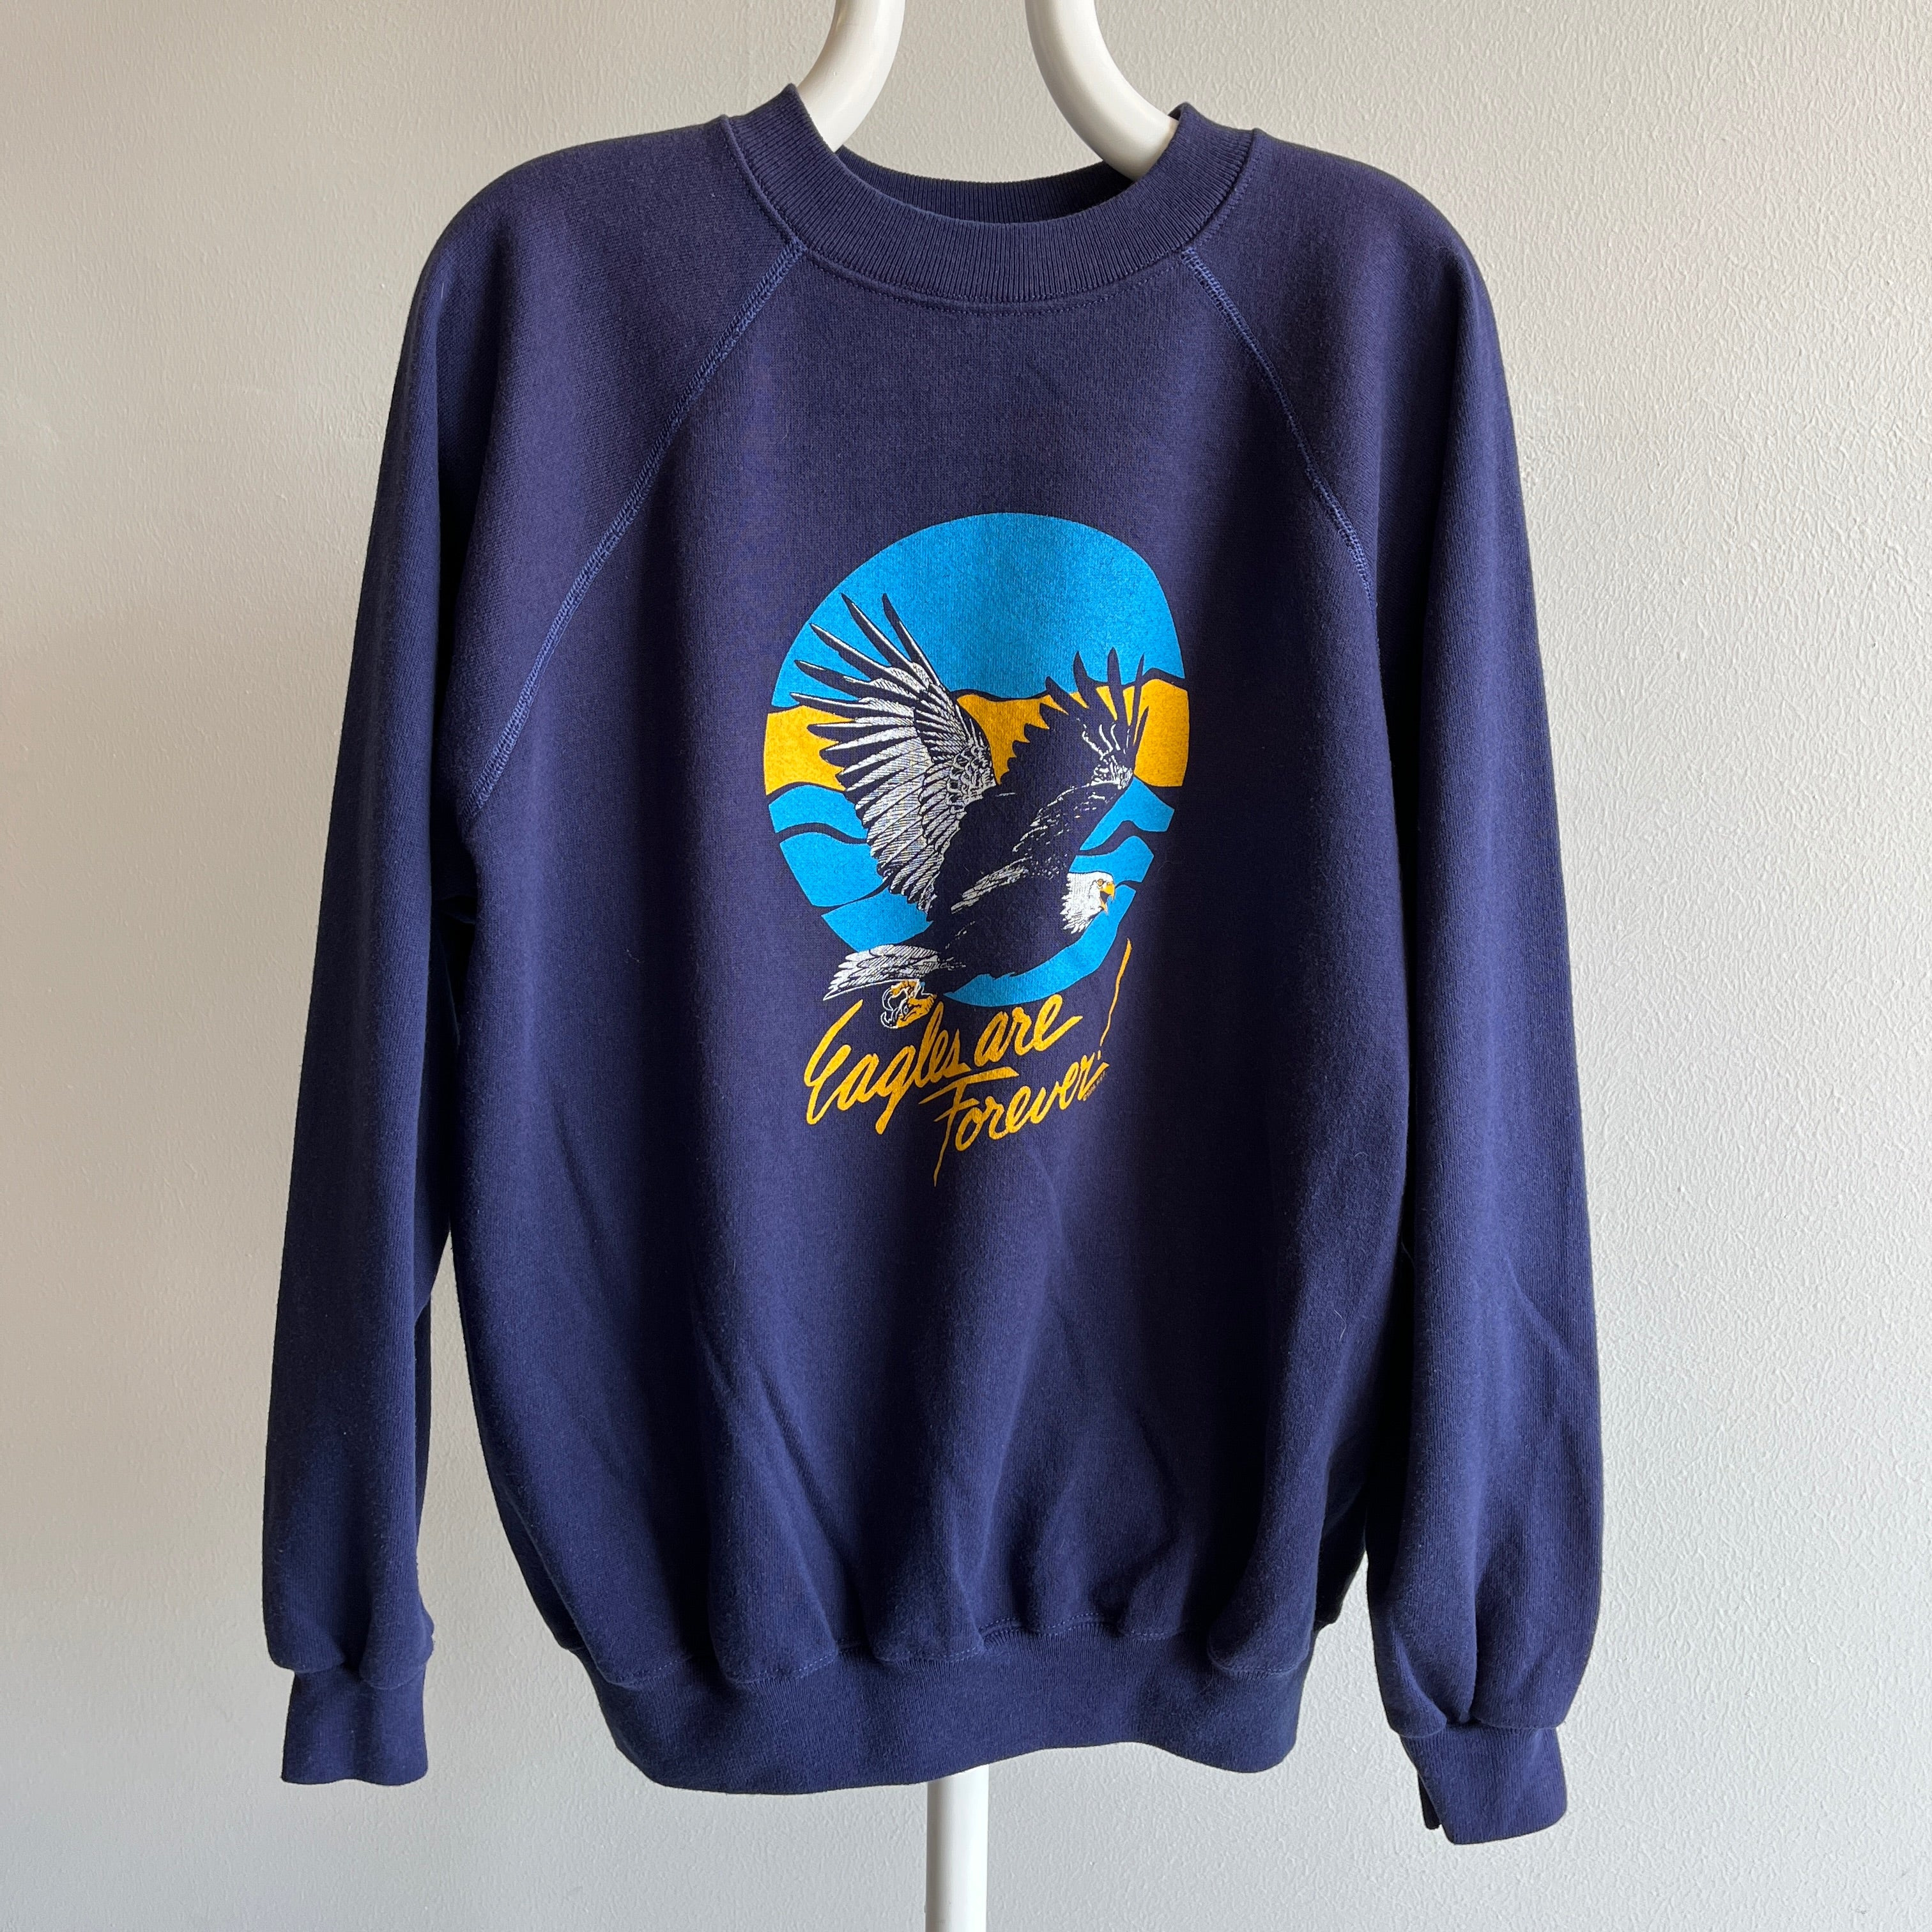 1980s Eagles Are Forever Graphic Sweatshirt